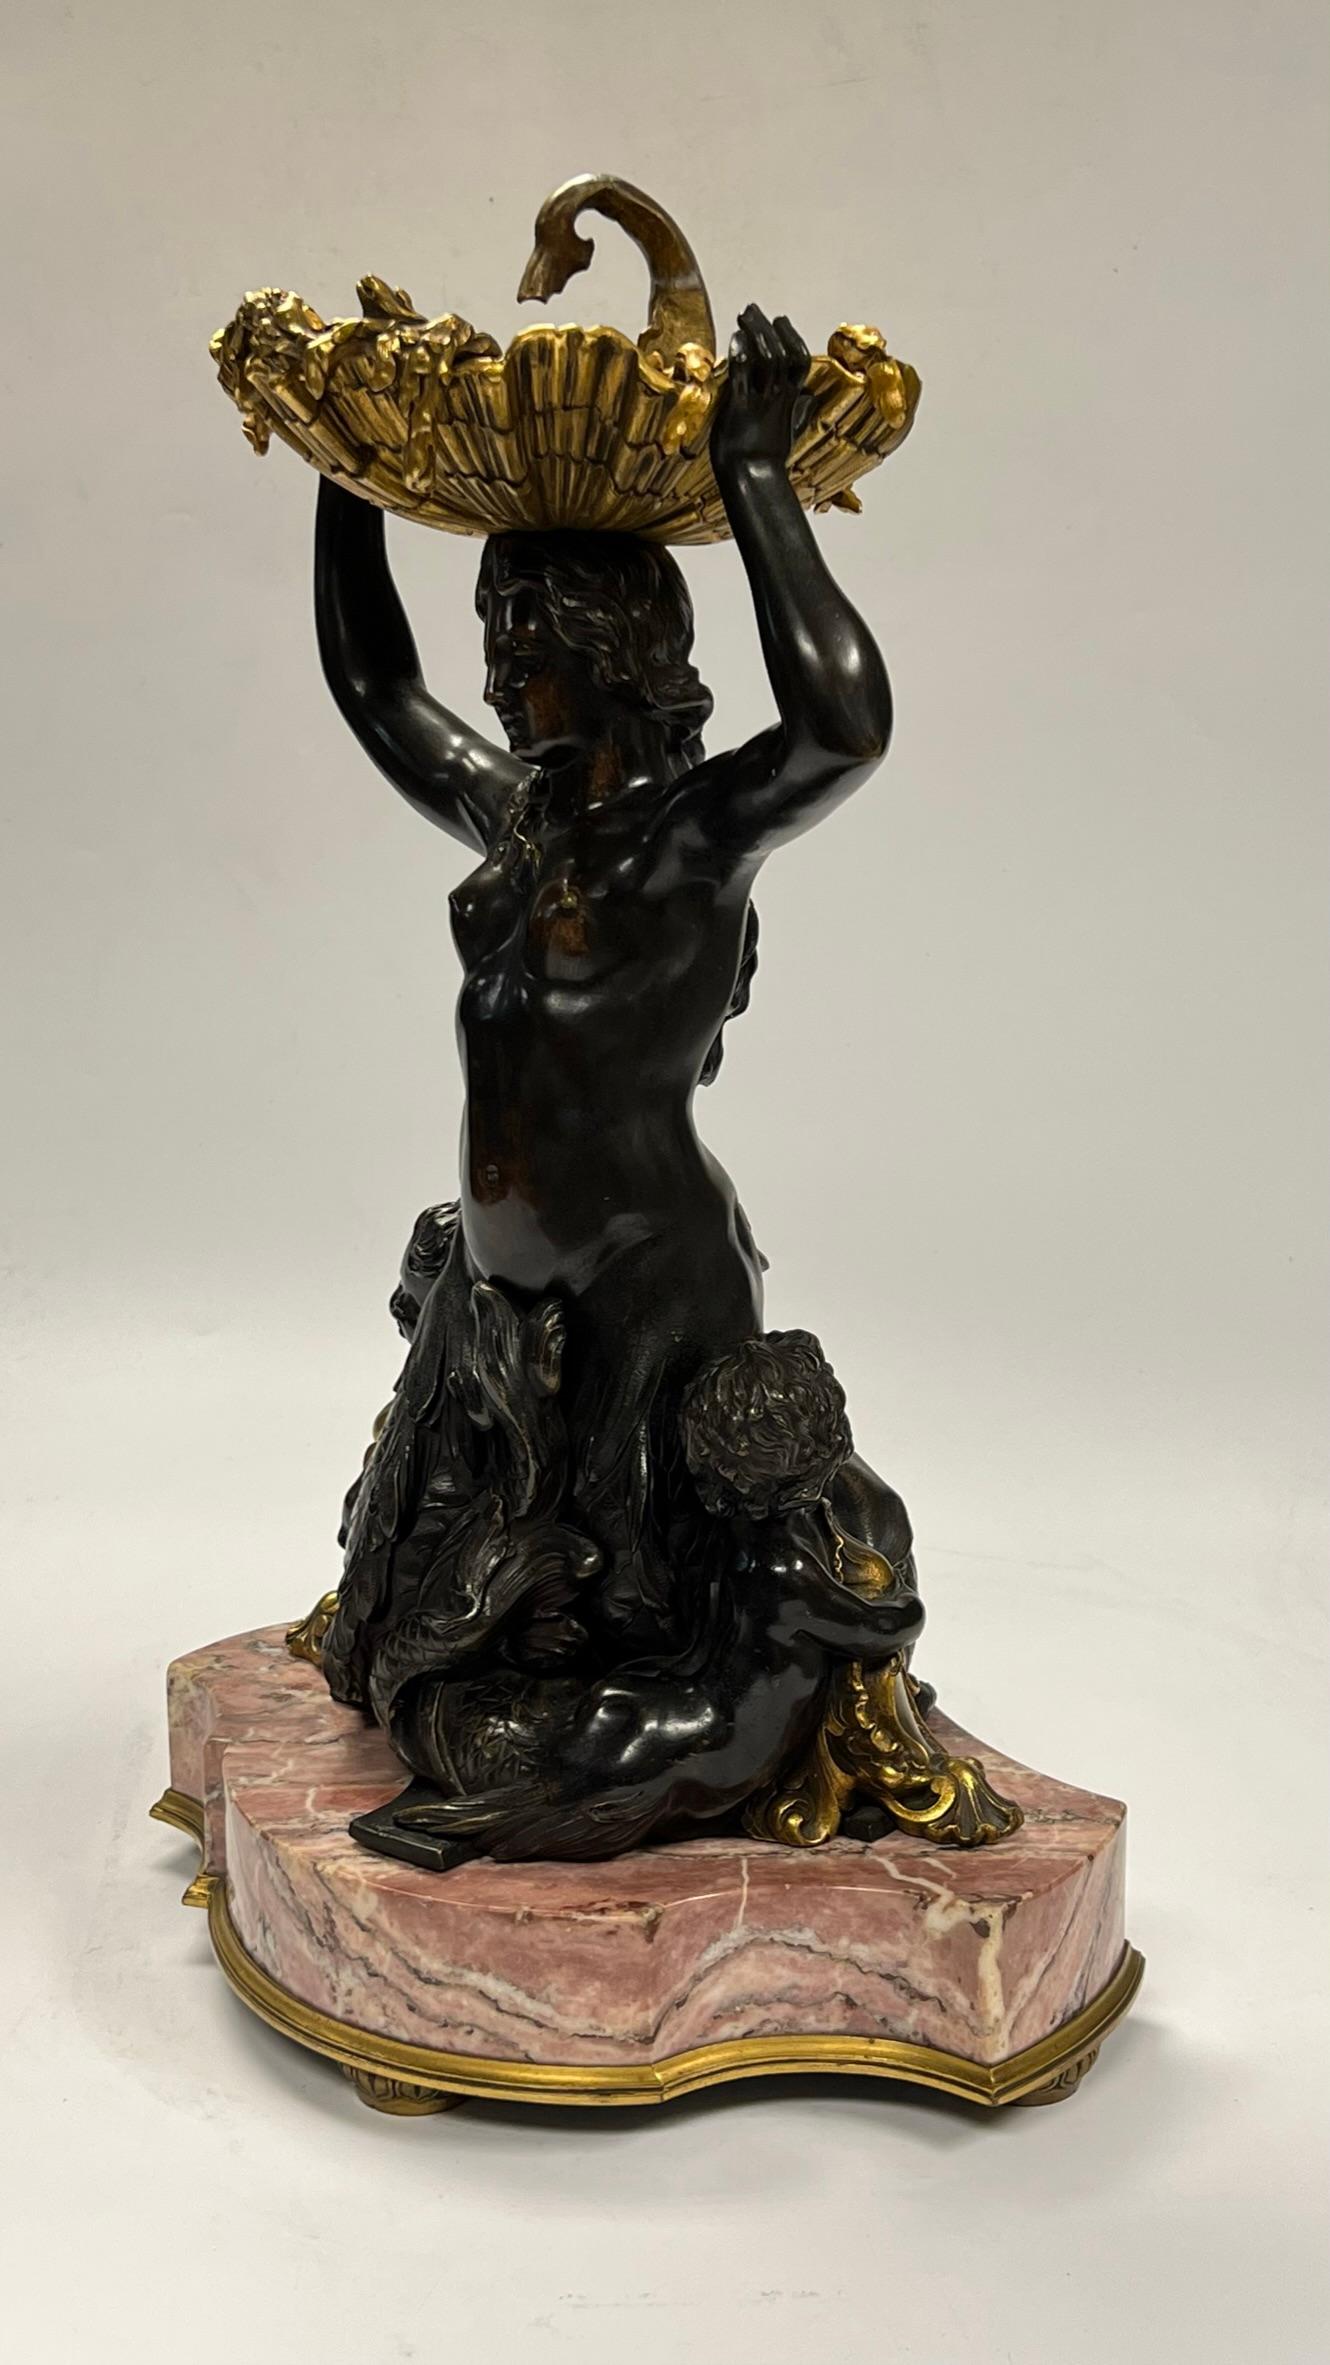 American Antique Gilt Bronze and Marble Figural Centerpiece Attributed to E.F. Caldwell